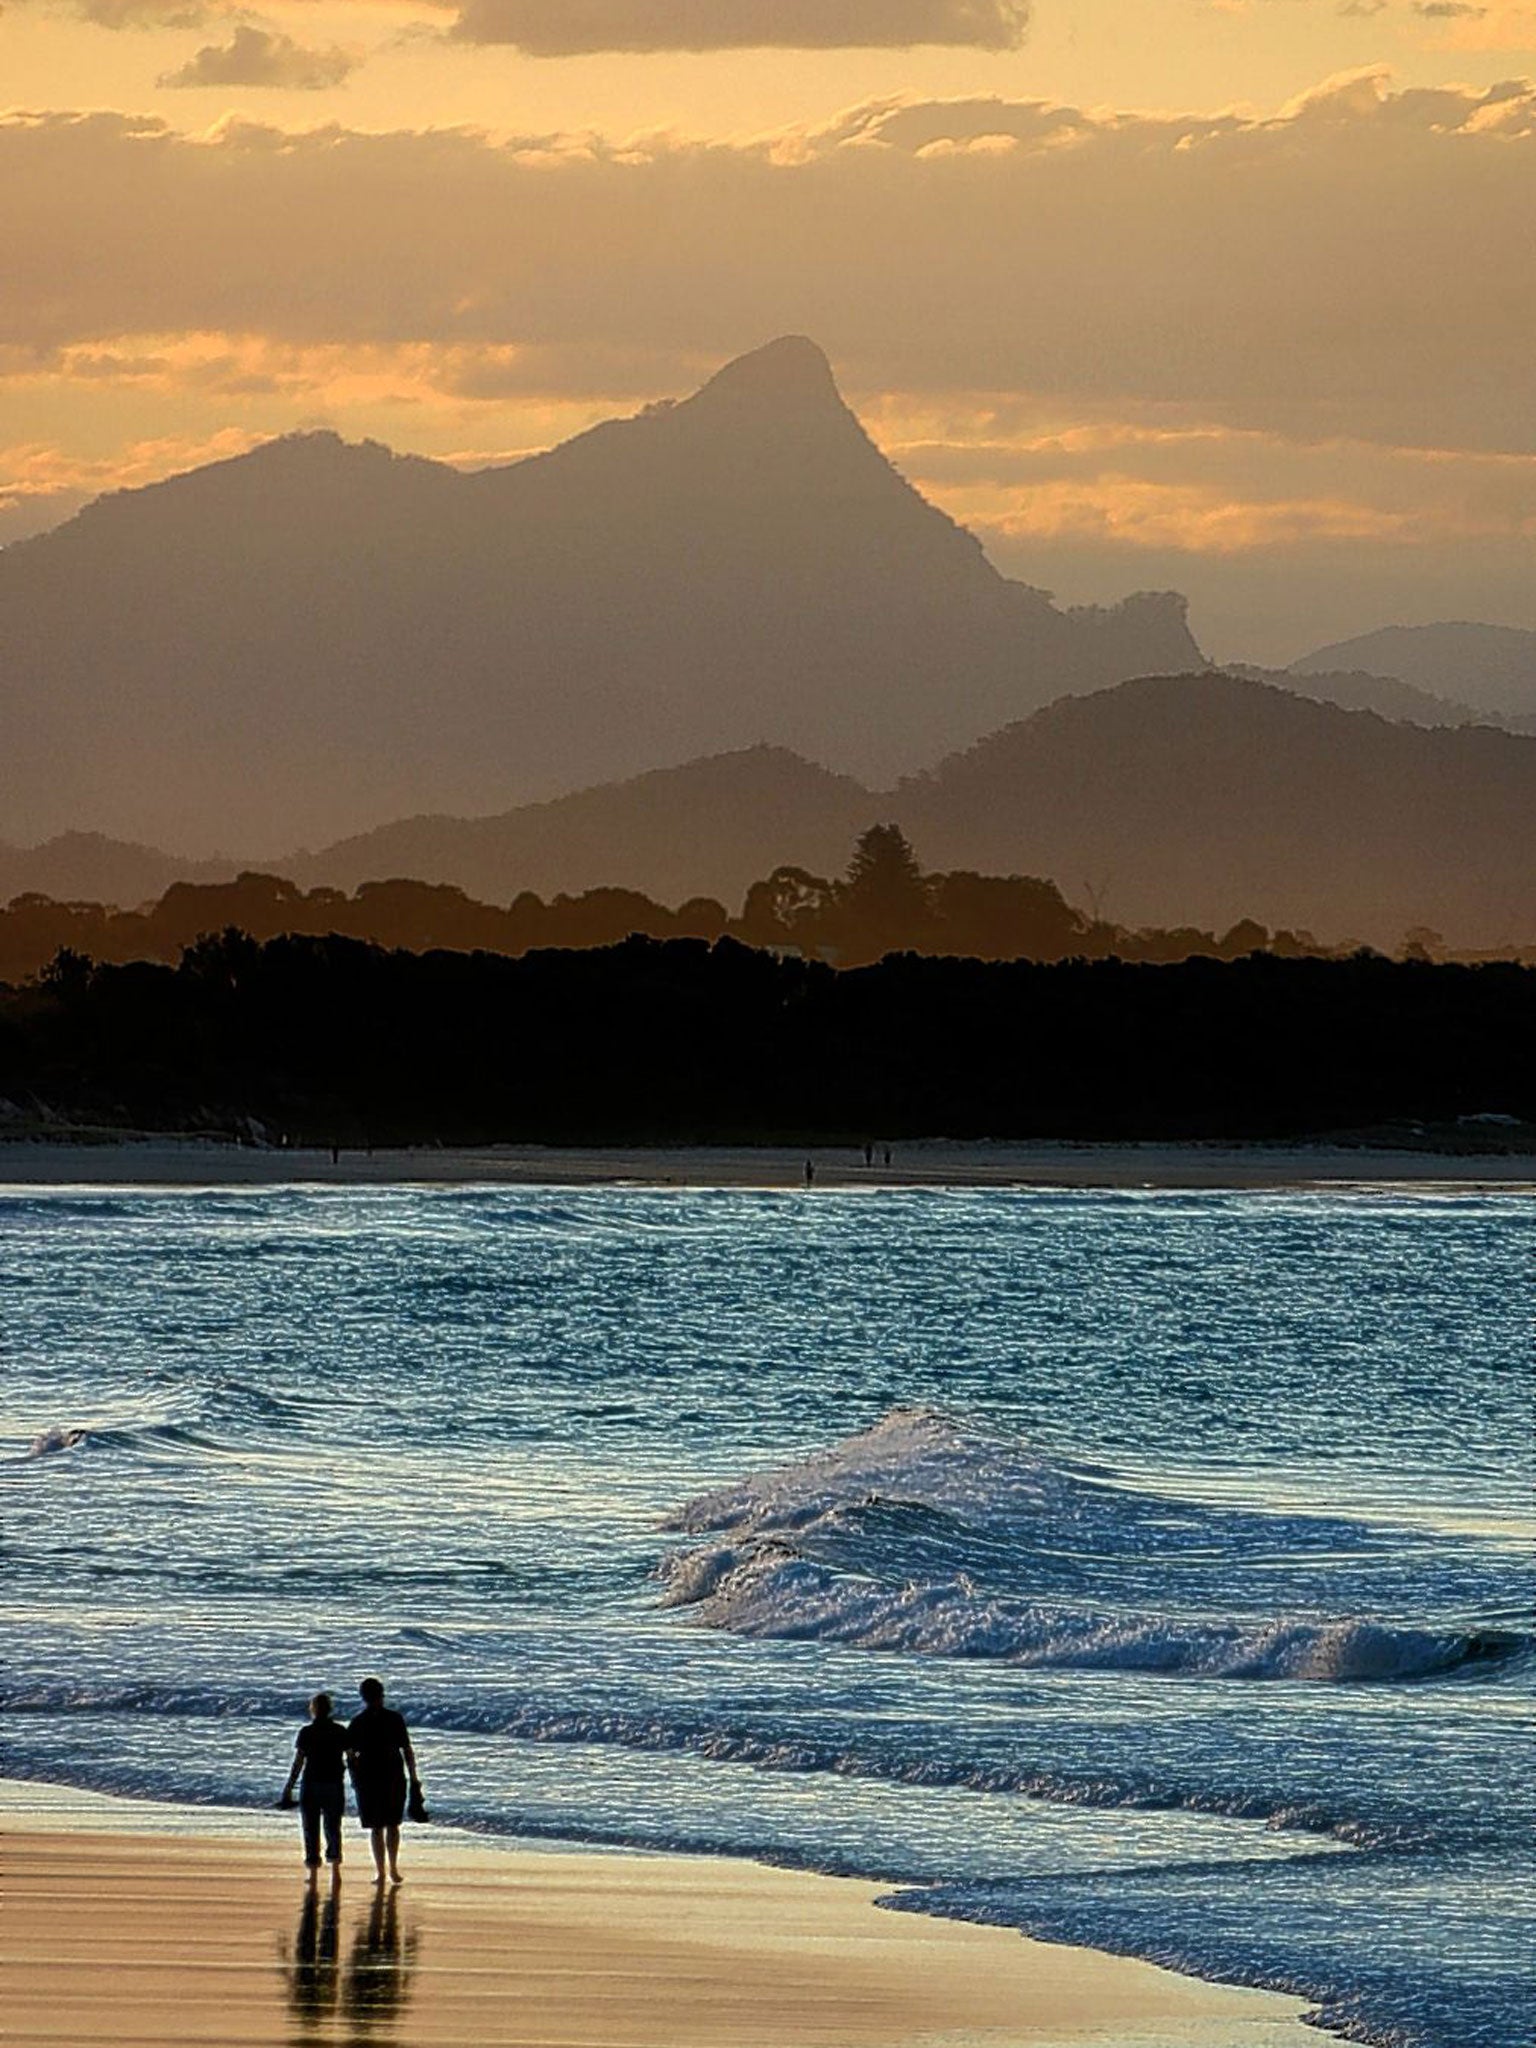 Byron Bay, the easternmost point in Australia